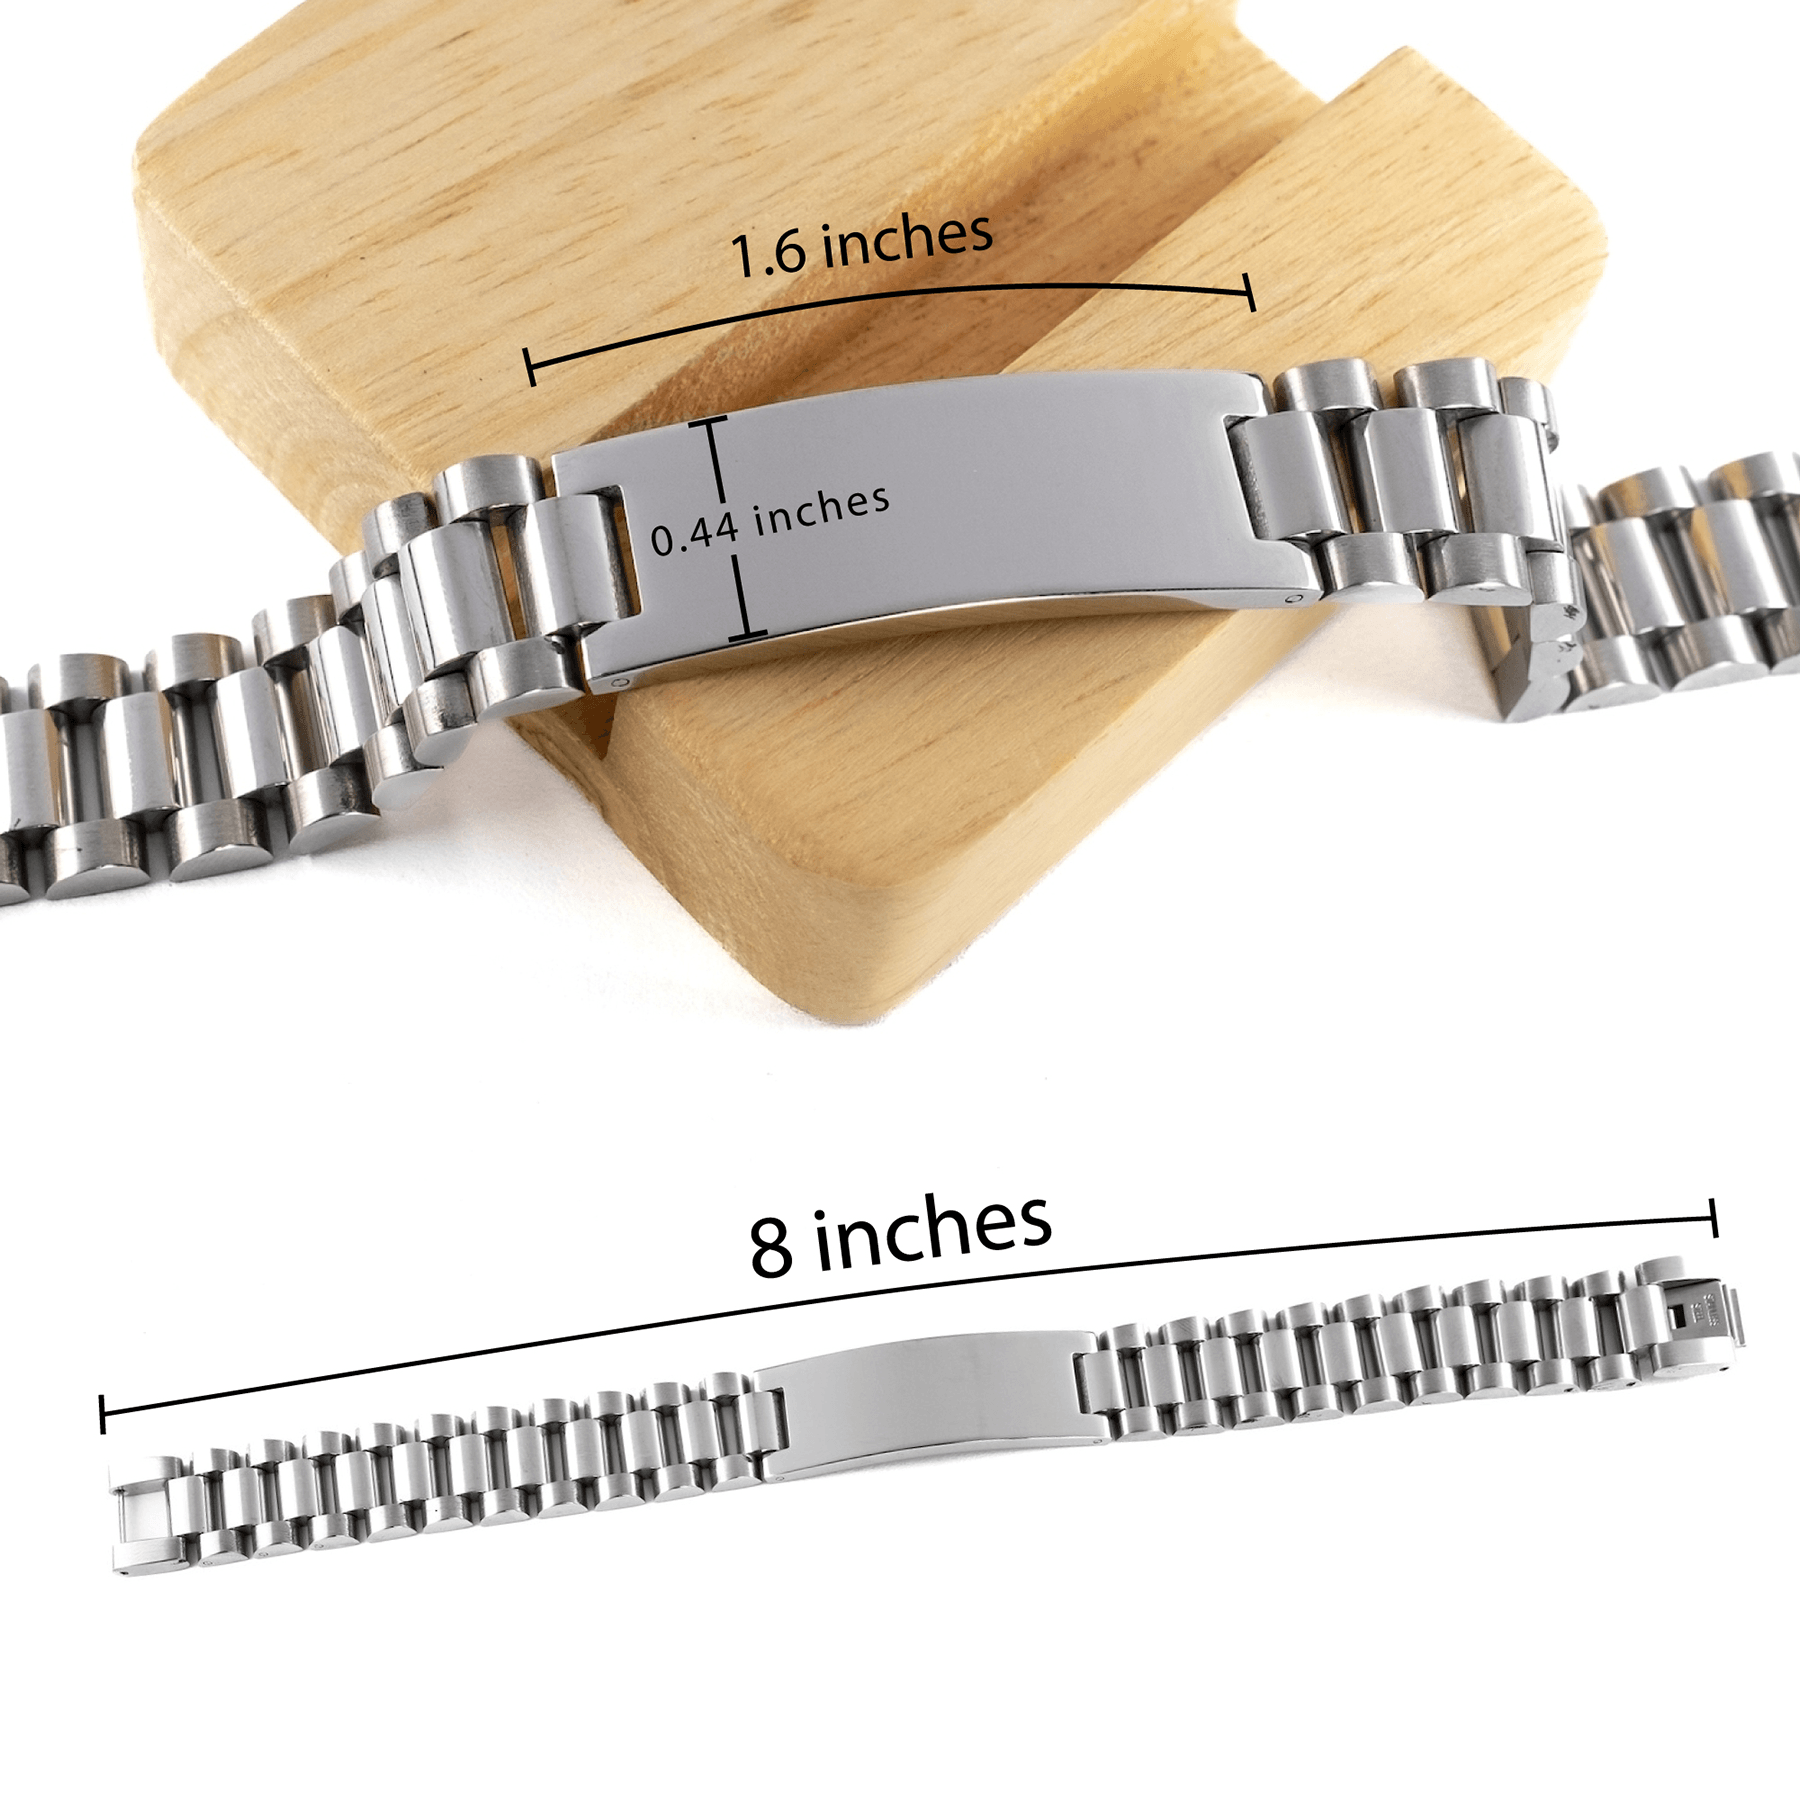 Remarkable Insurance Adjuster Gifts, Your dedication and hard work, Inspirational Birthday Christmas Unique Ladder Stainless Steel Bracelet For Insurance Adjuster, Coworkers, Men, Women, Friends - Mallard Moon Gift Shop